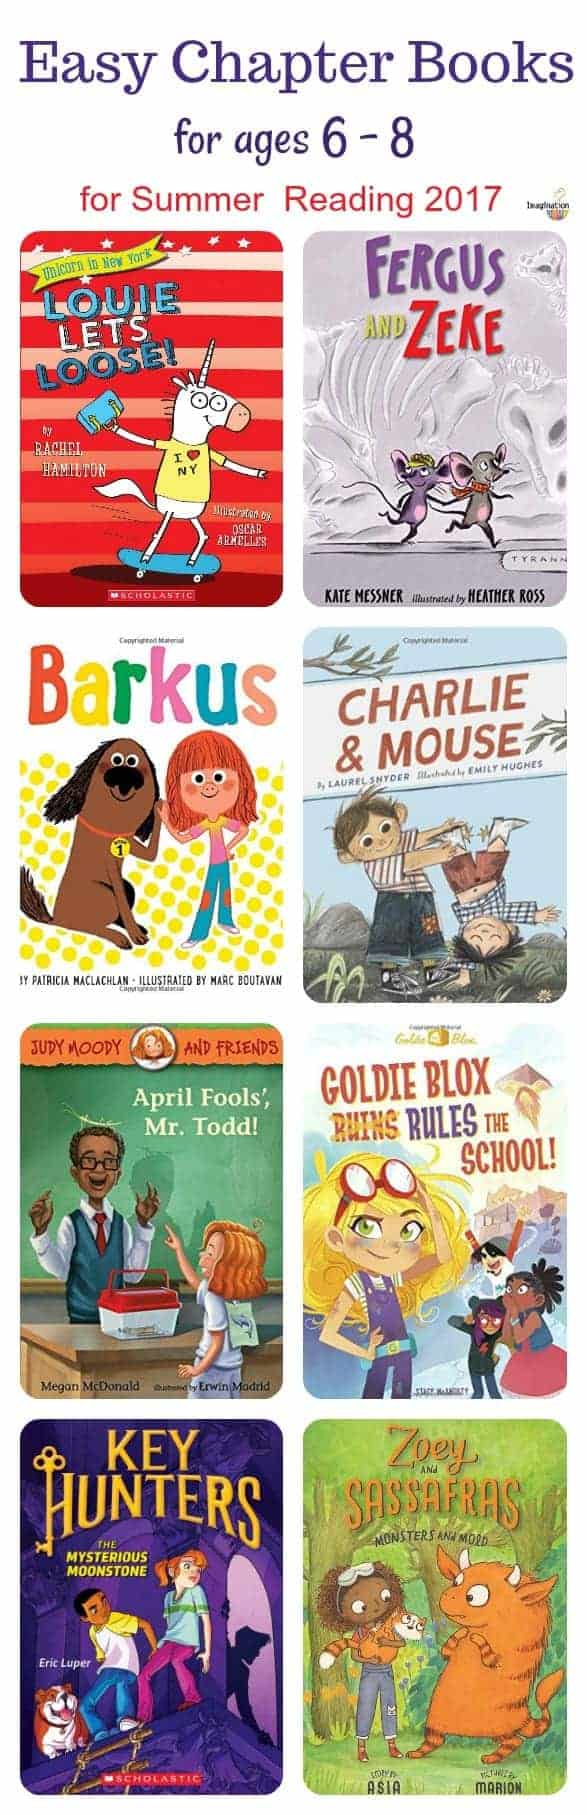 get your kids ages 6 to 8 reading with new, easy chapter books for 2017